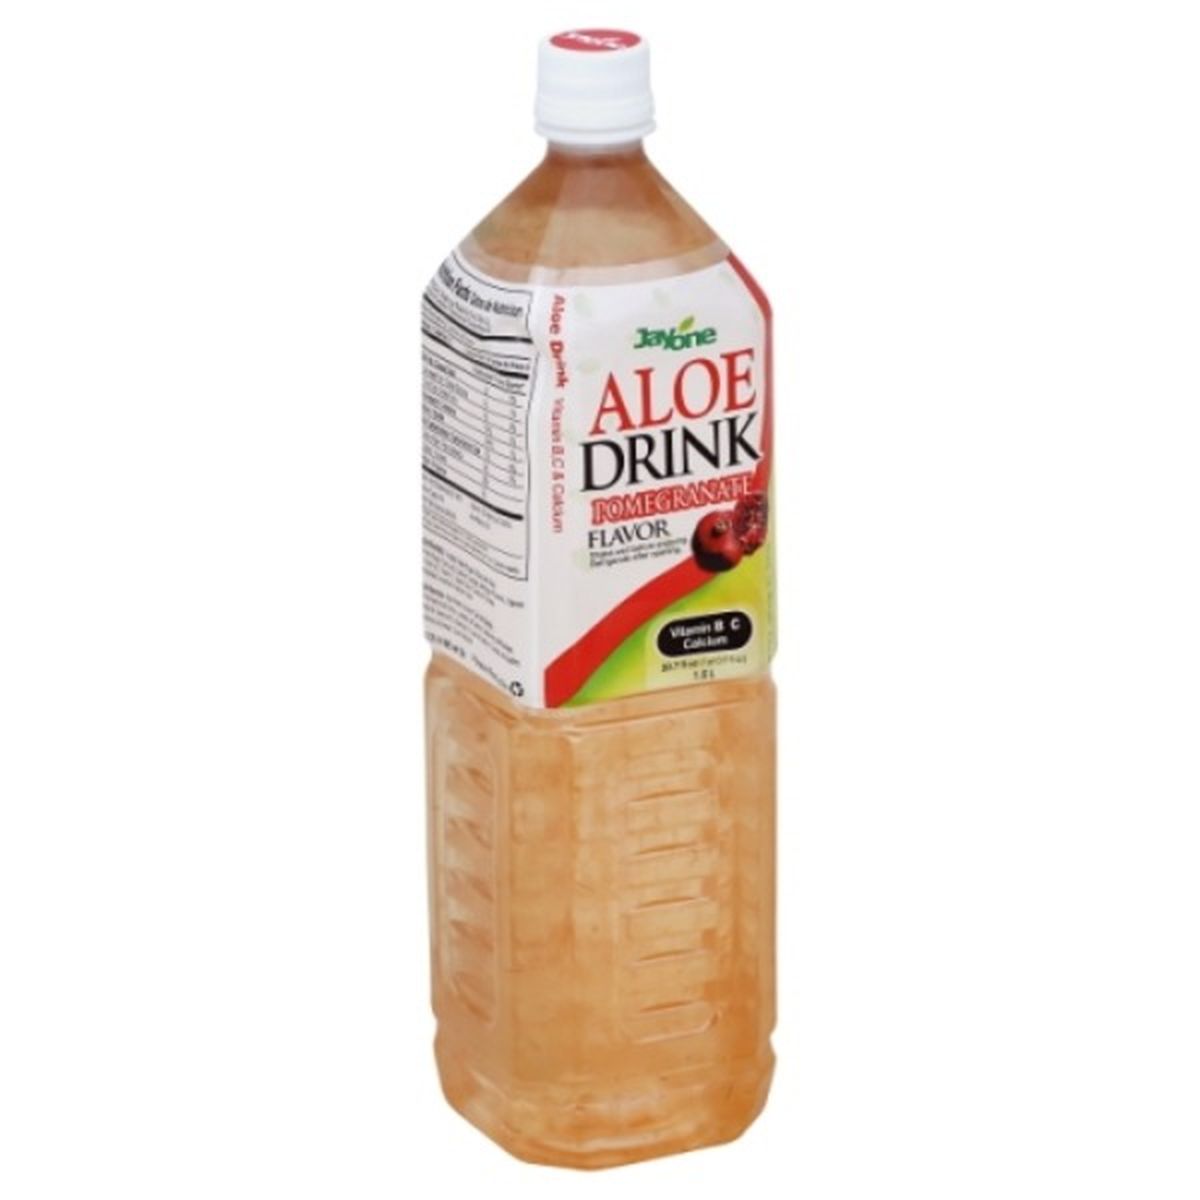 Calories in Jayone Aloe Drink, Pomegranate Flavor